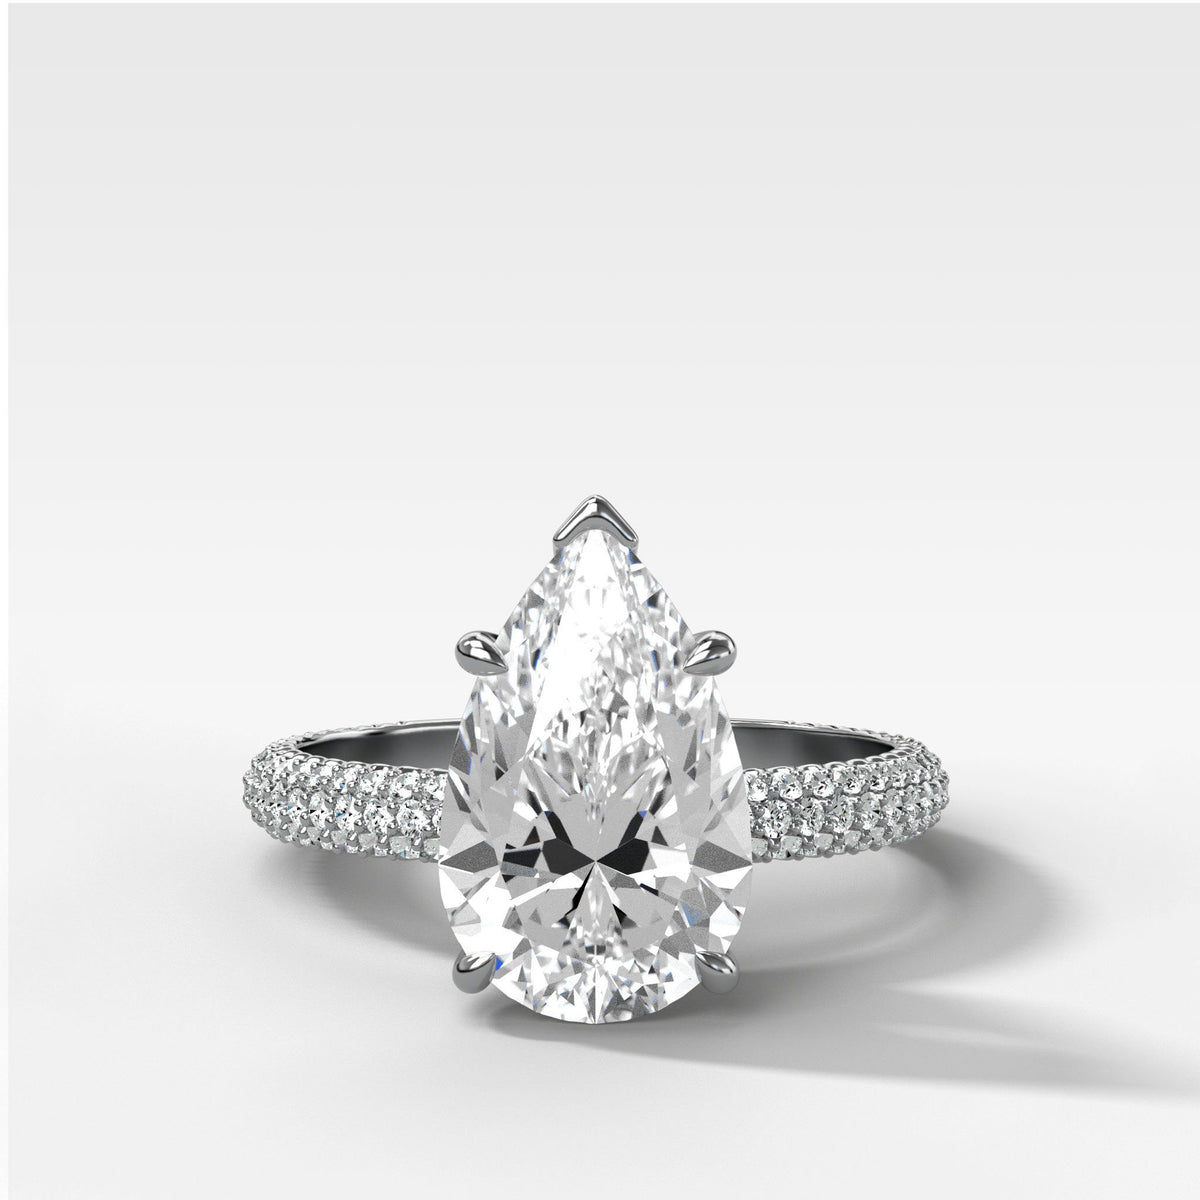 Triple Row Pav≈Ω Engagement Ring With Pear Cut by Good Stone in White Gold